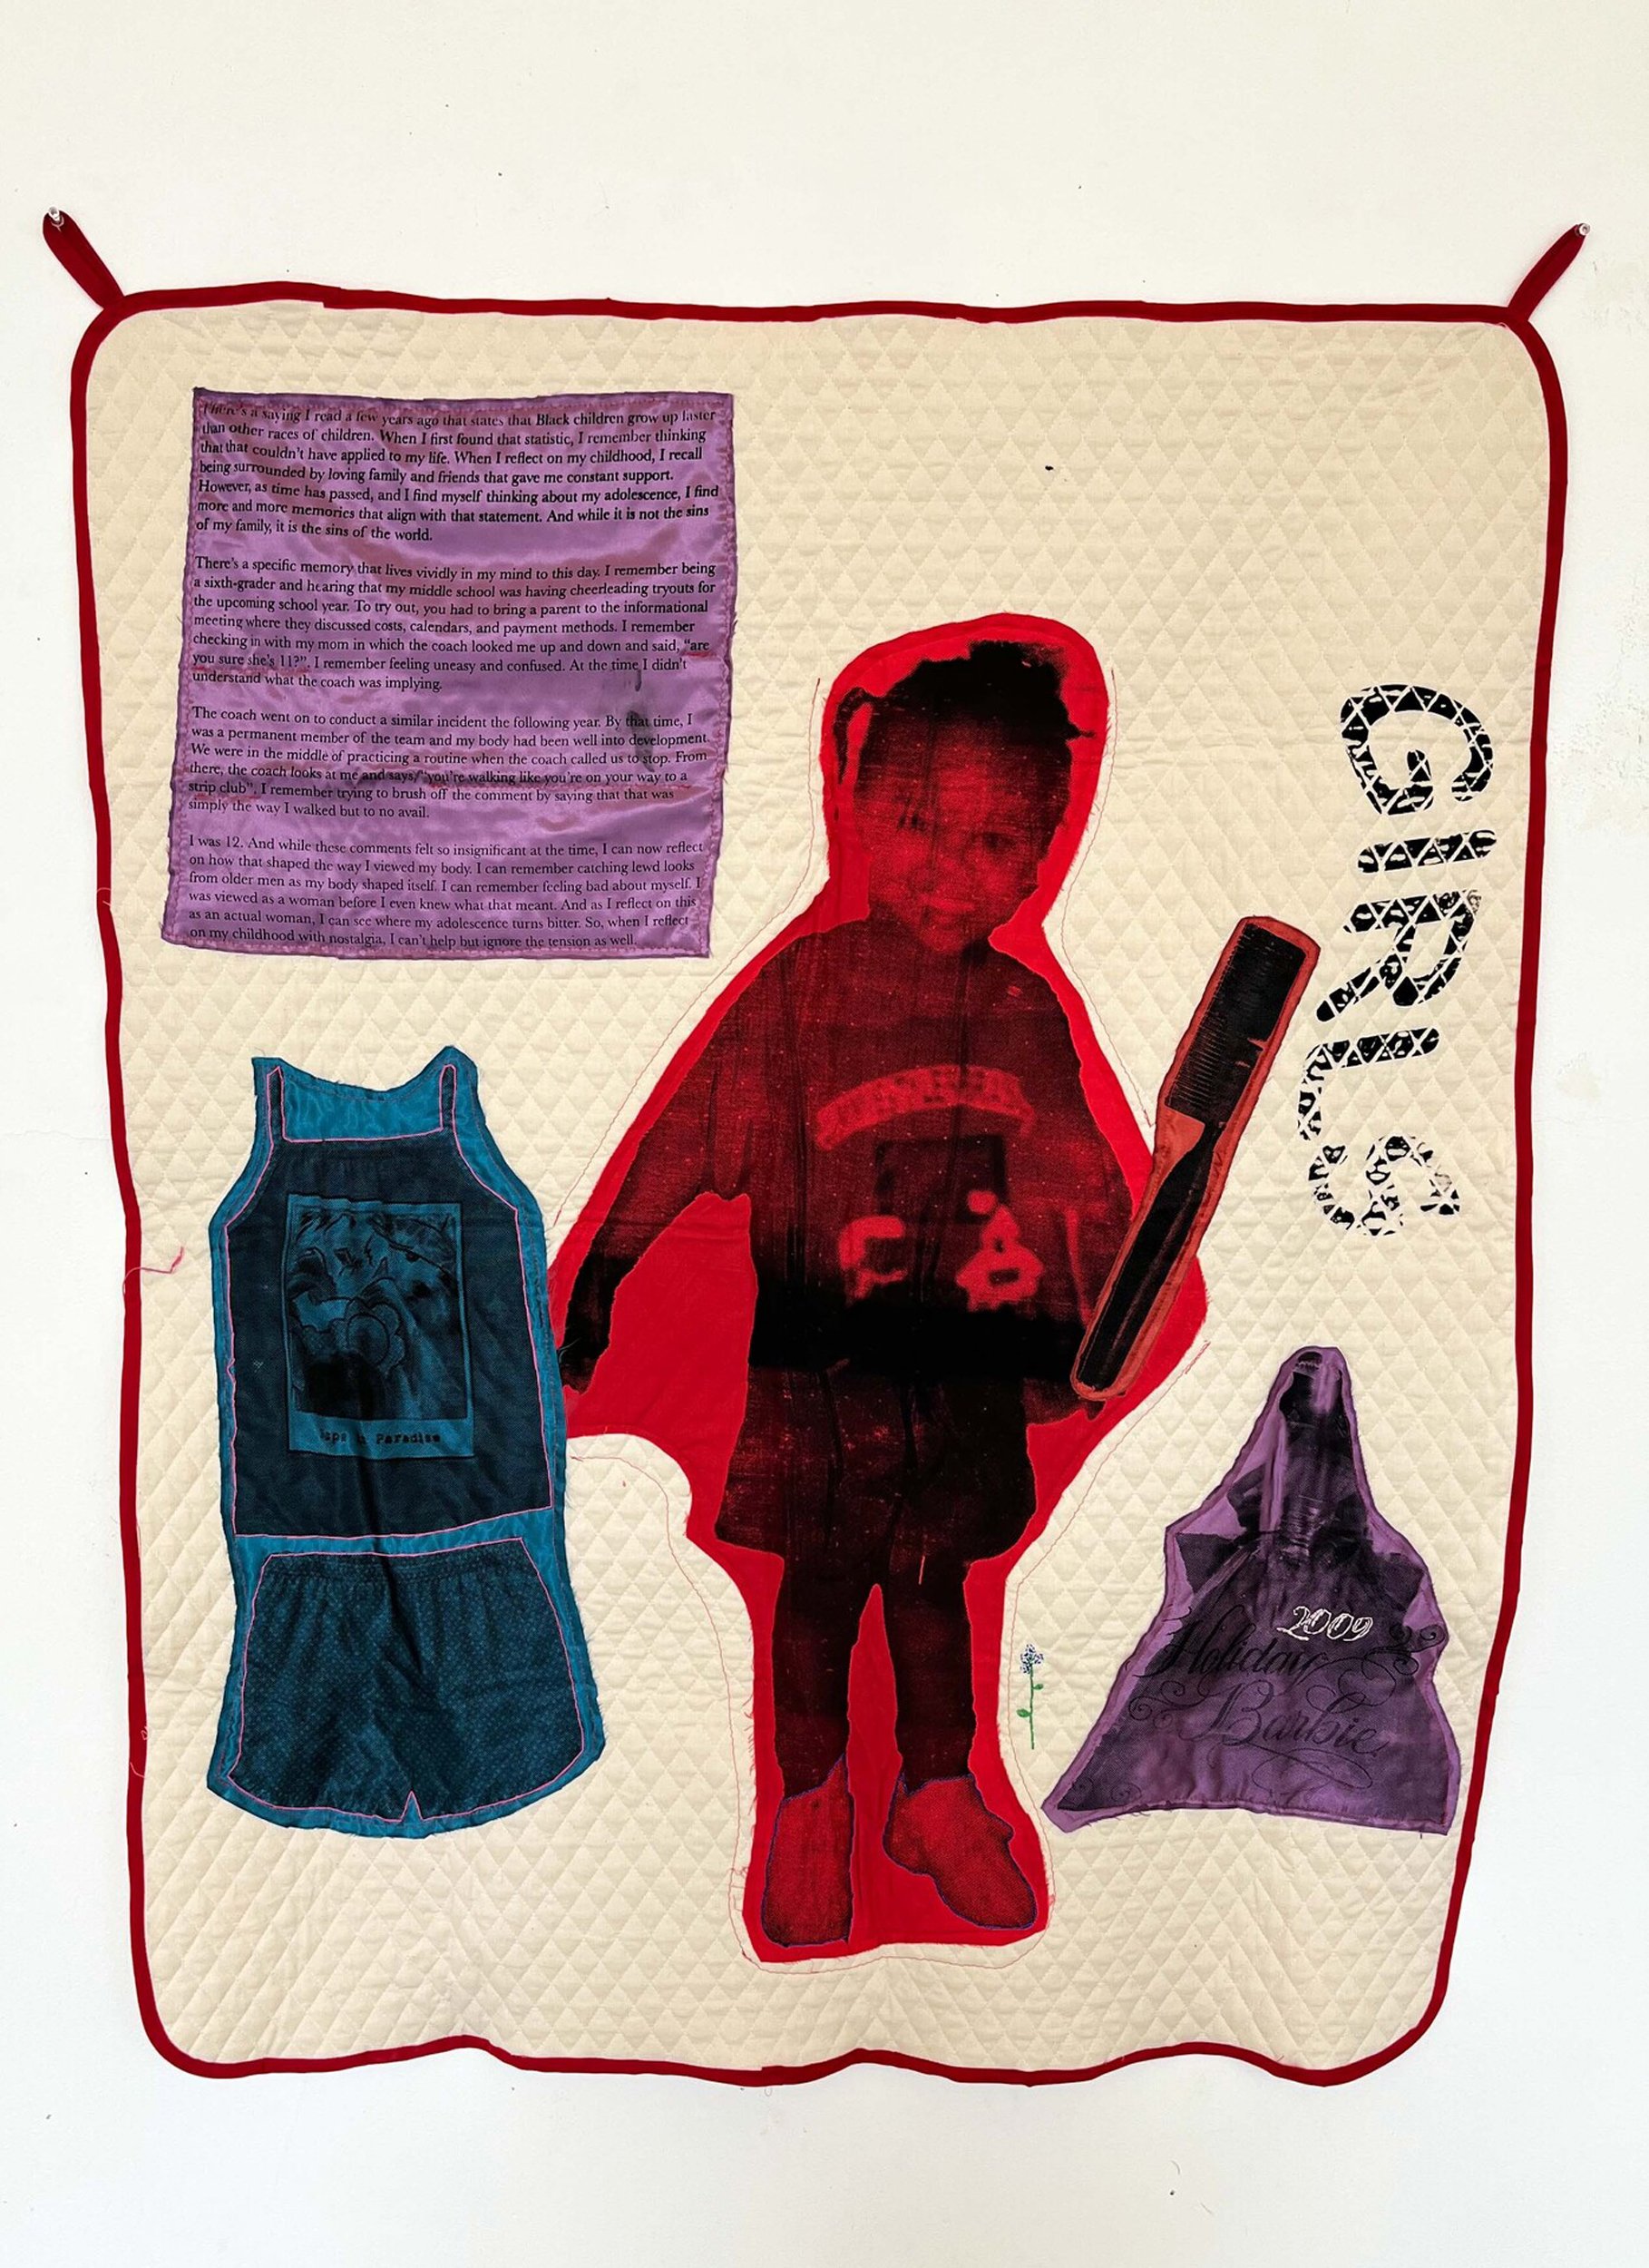  Madison Cooper   Fast Little Girls (v.3)   Screenprint on cotton, muslin, and satin, embroidery 